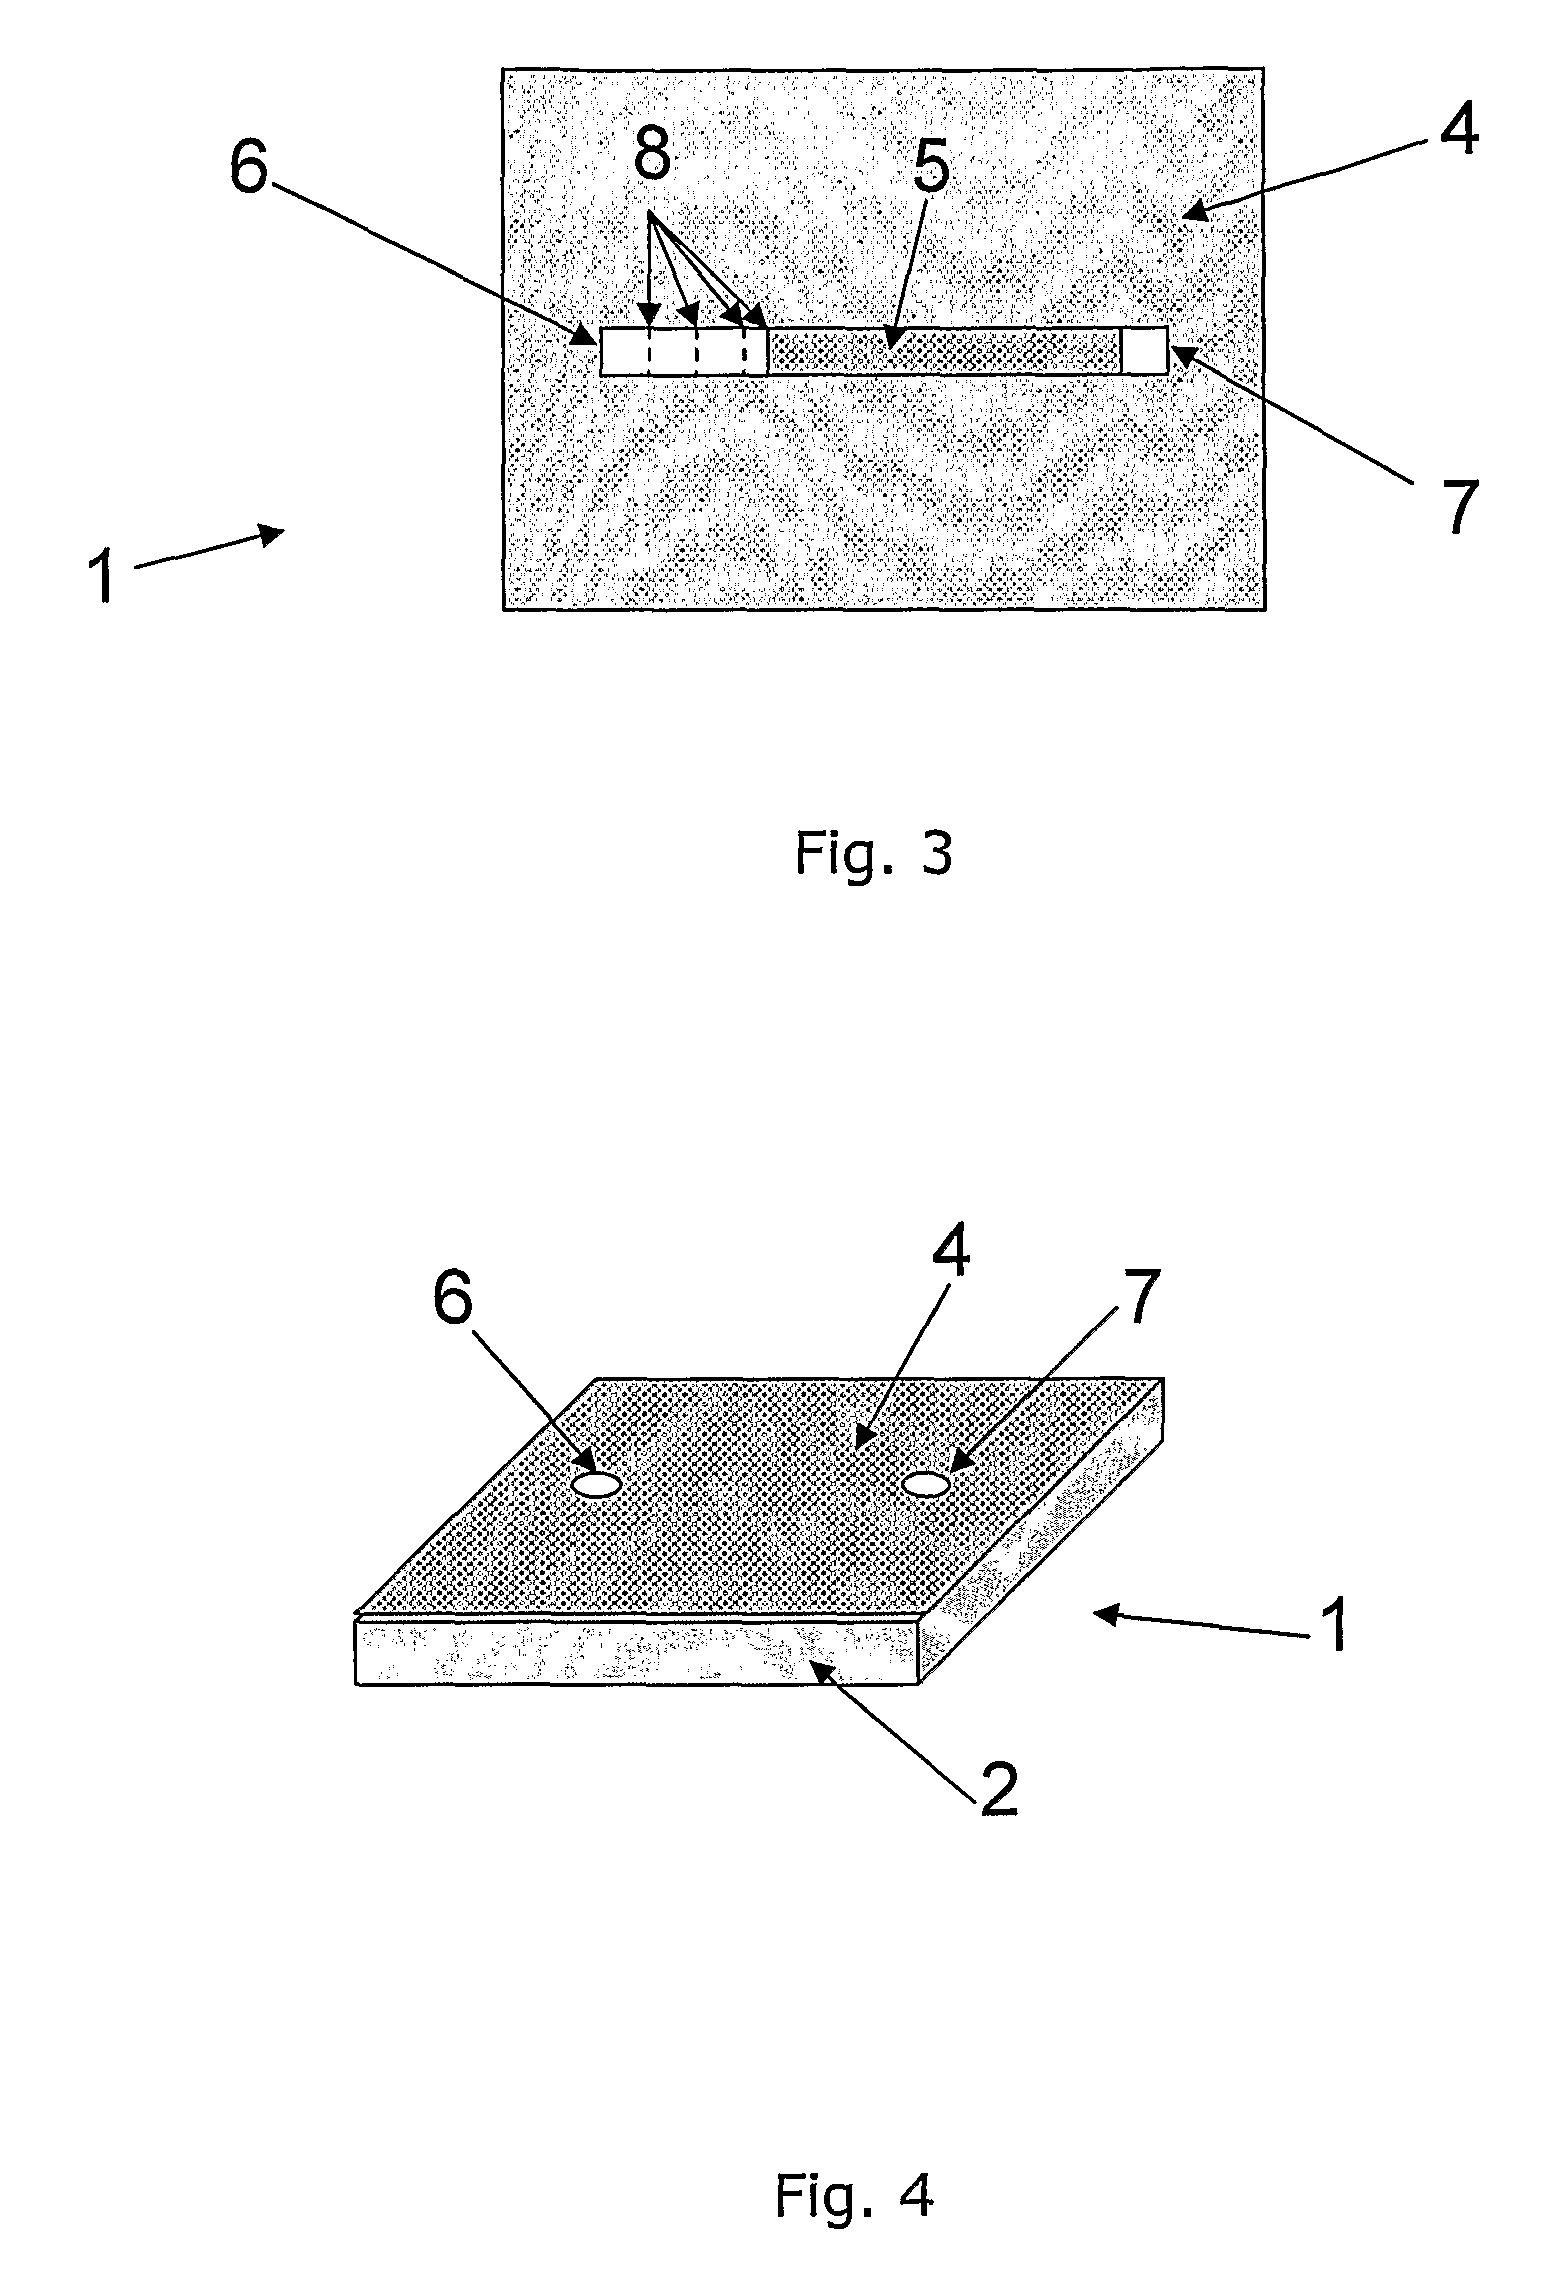 Method of forming a flow restriction in a fluid communication system